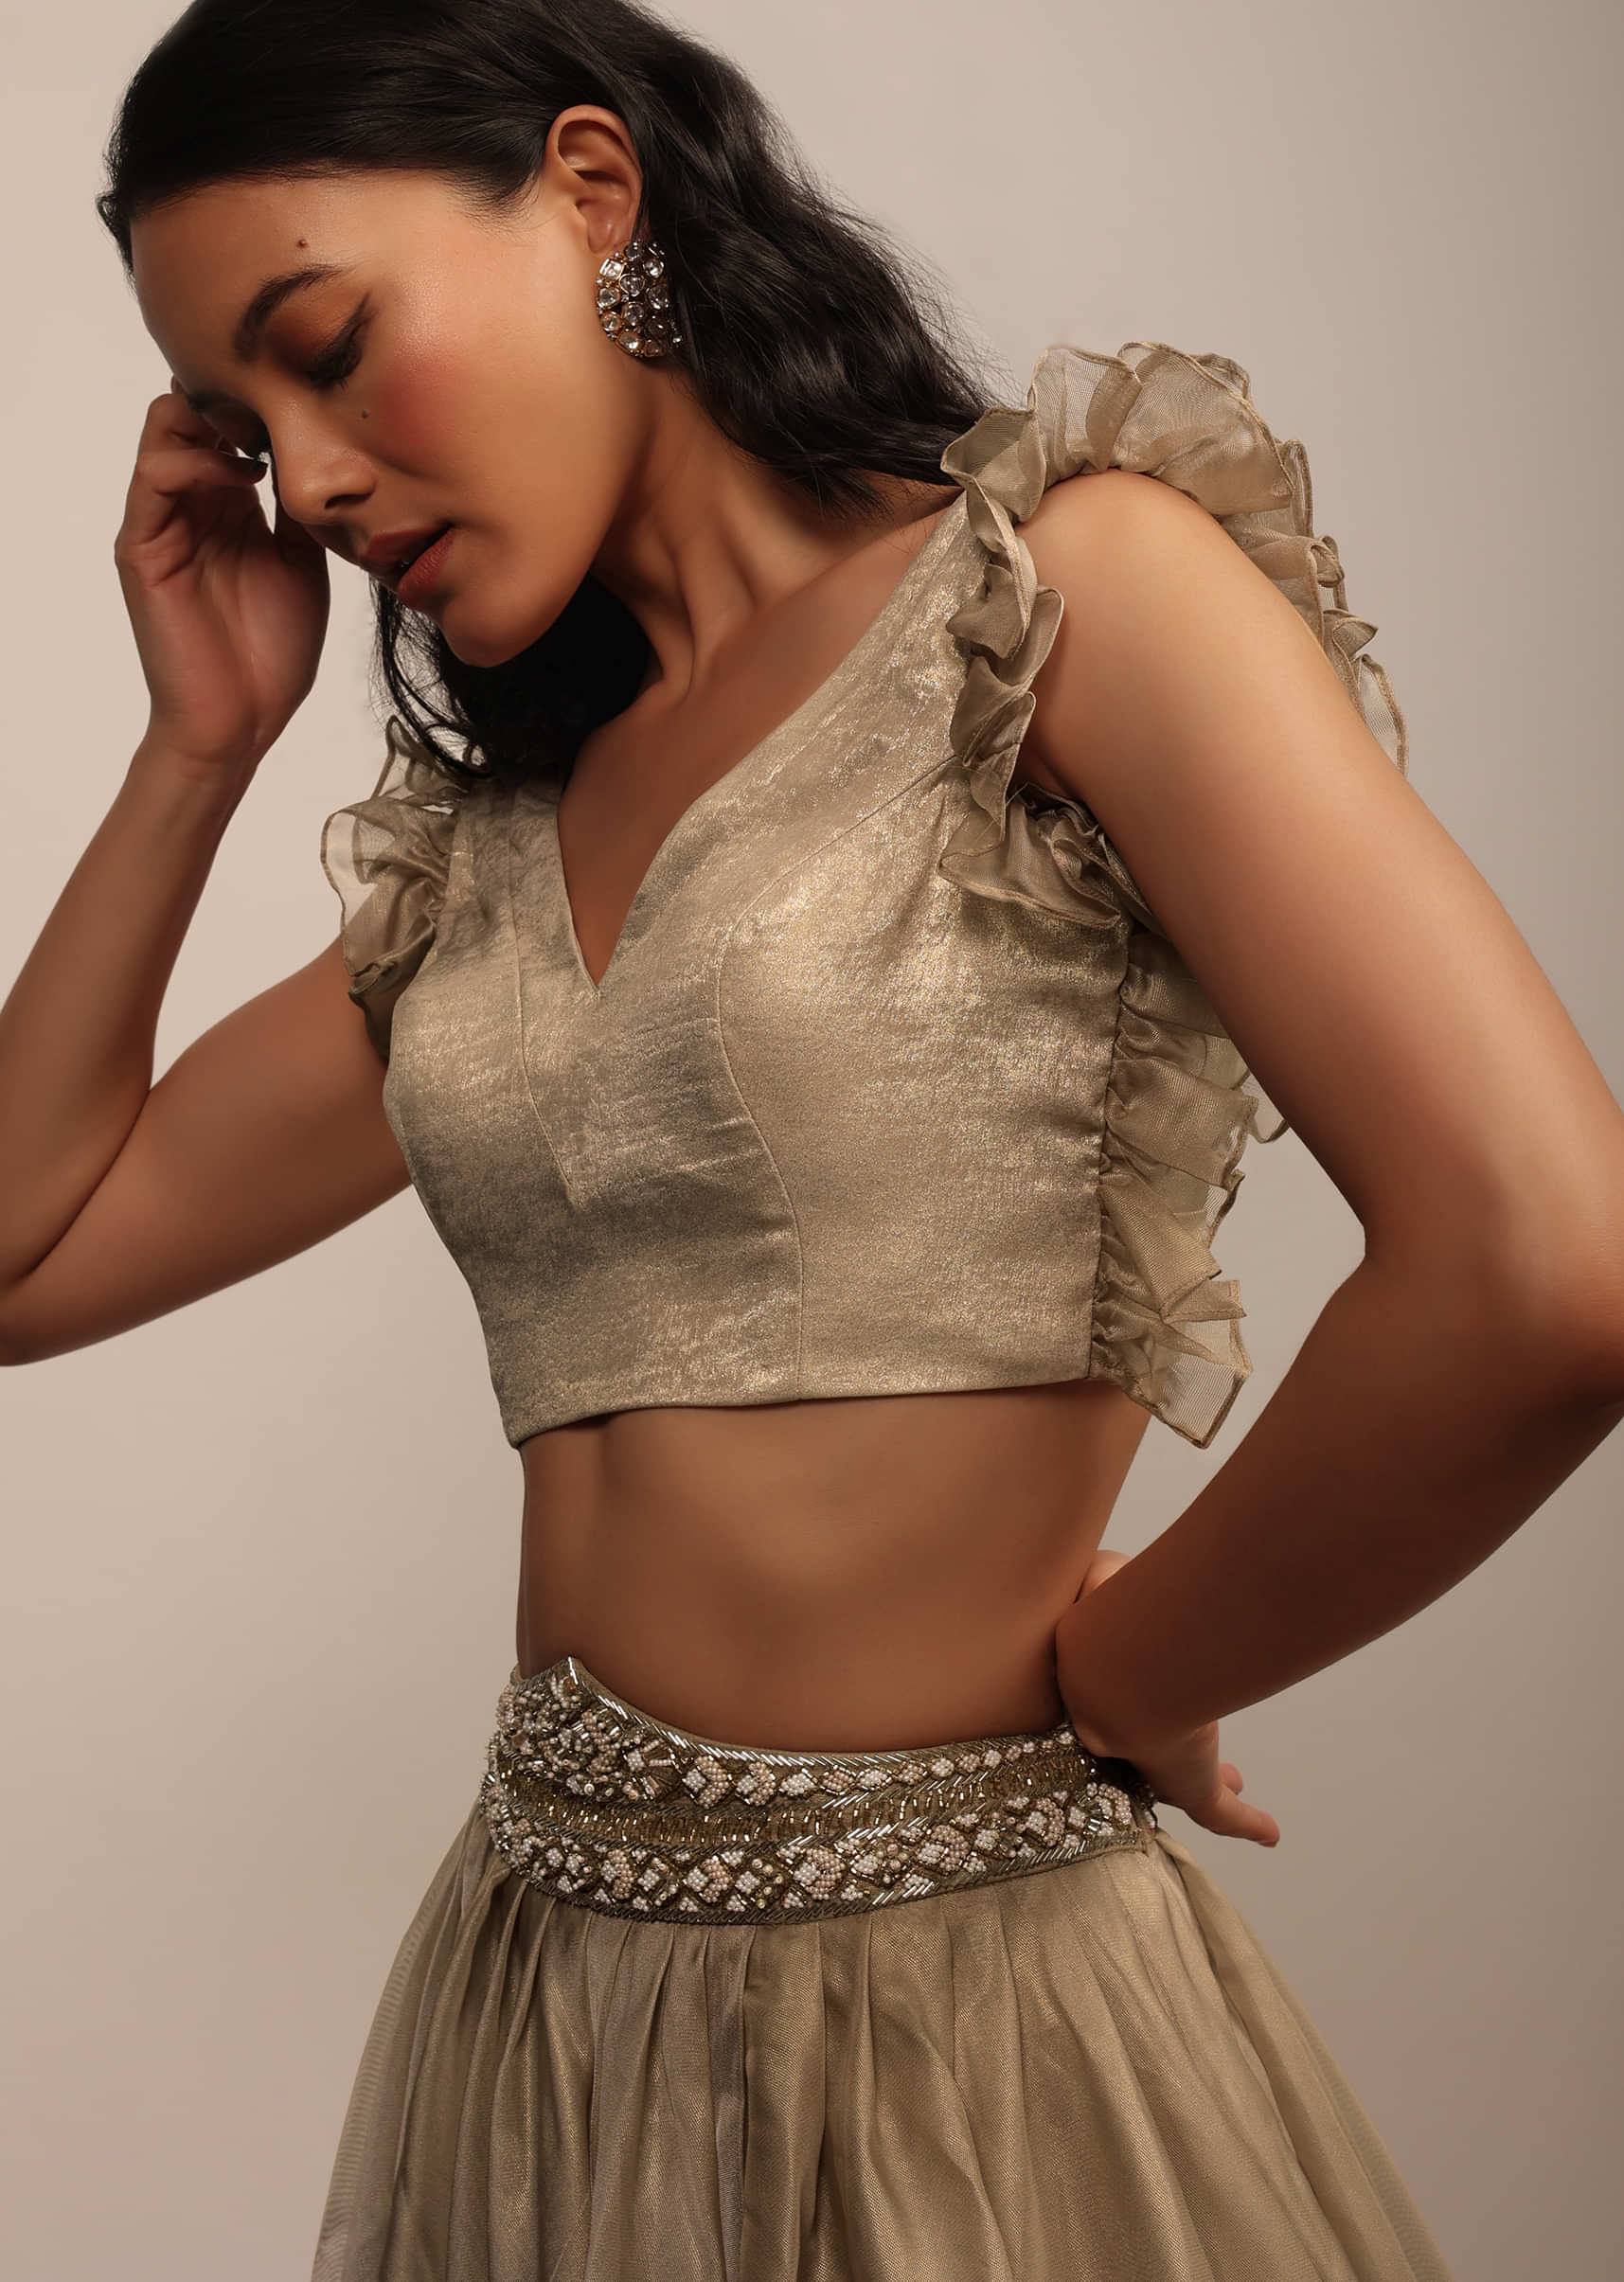 Golden Sleeveless Blouse In Satin Glam Gold With Ruffle Sleeve Frill